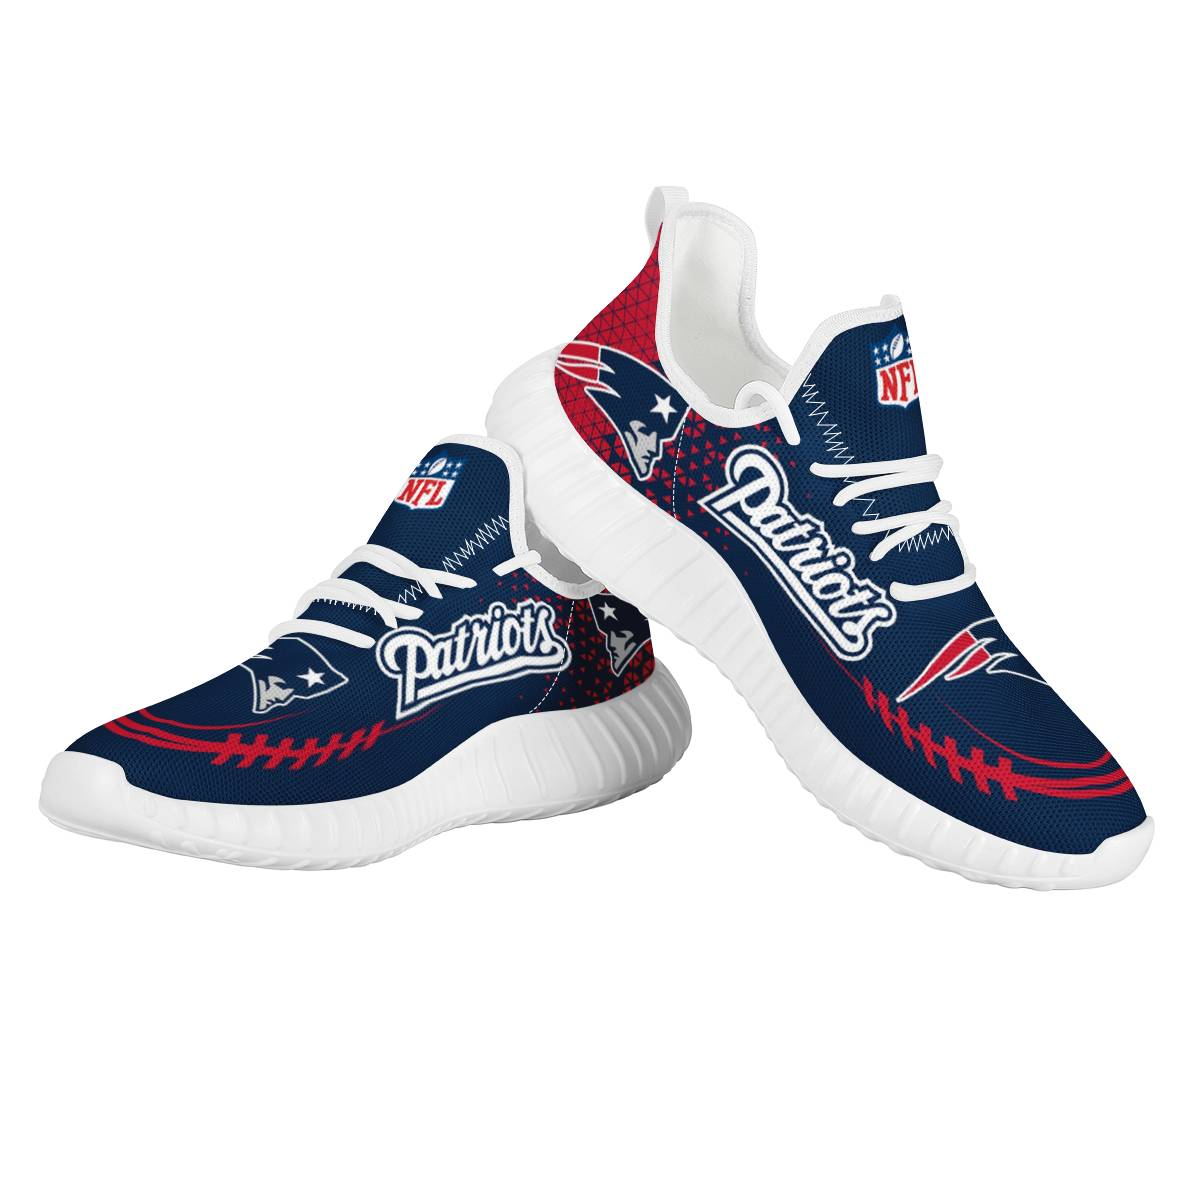 Men's New England Patriots Mesh Knit Sneakers/Shoes 013